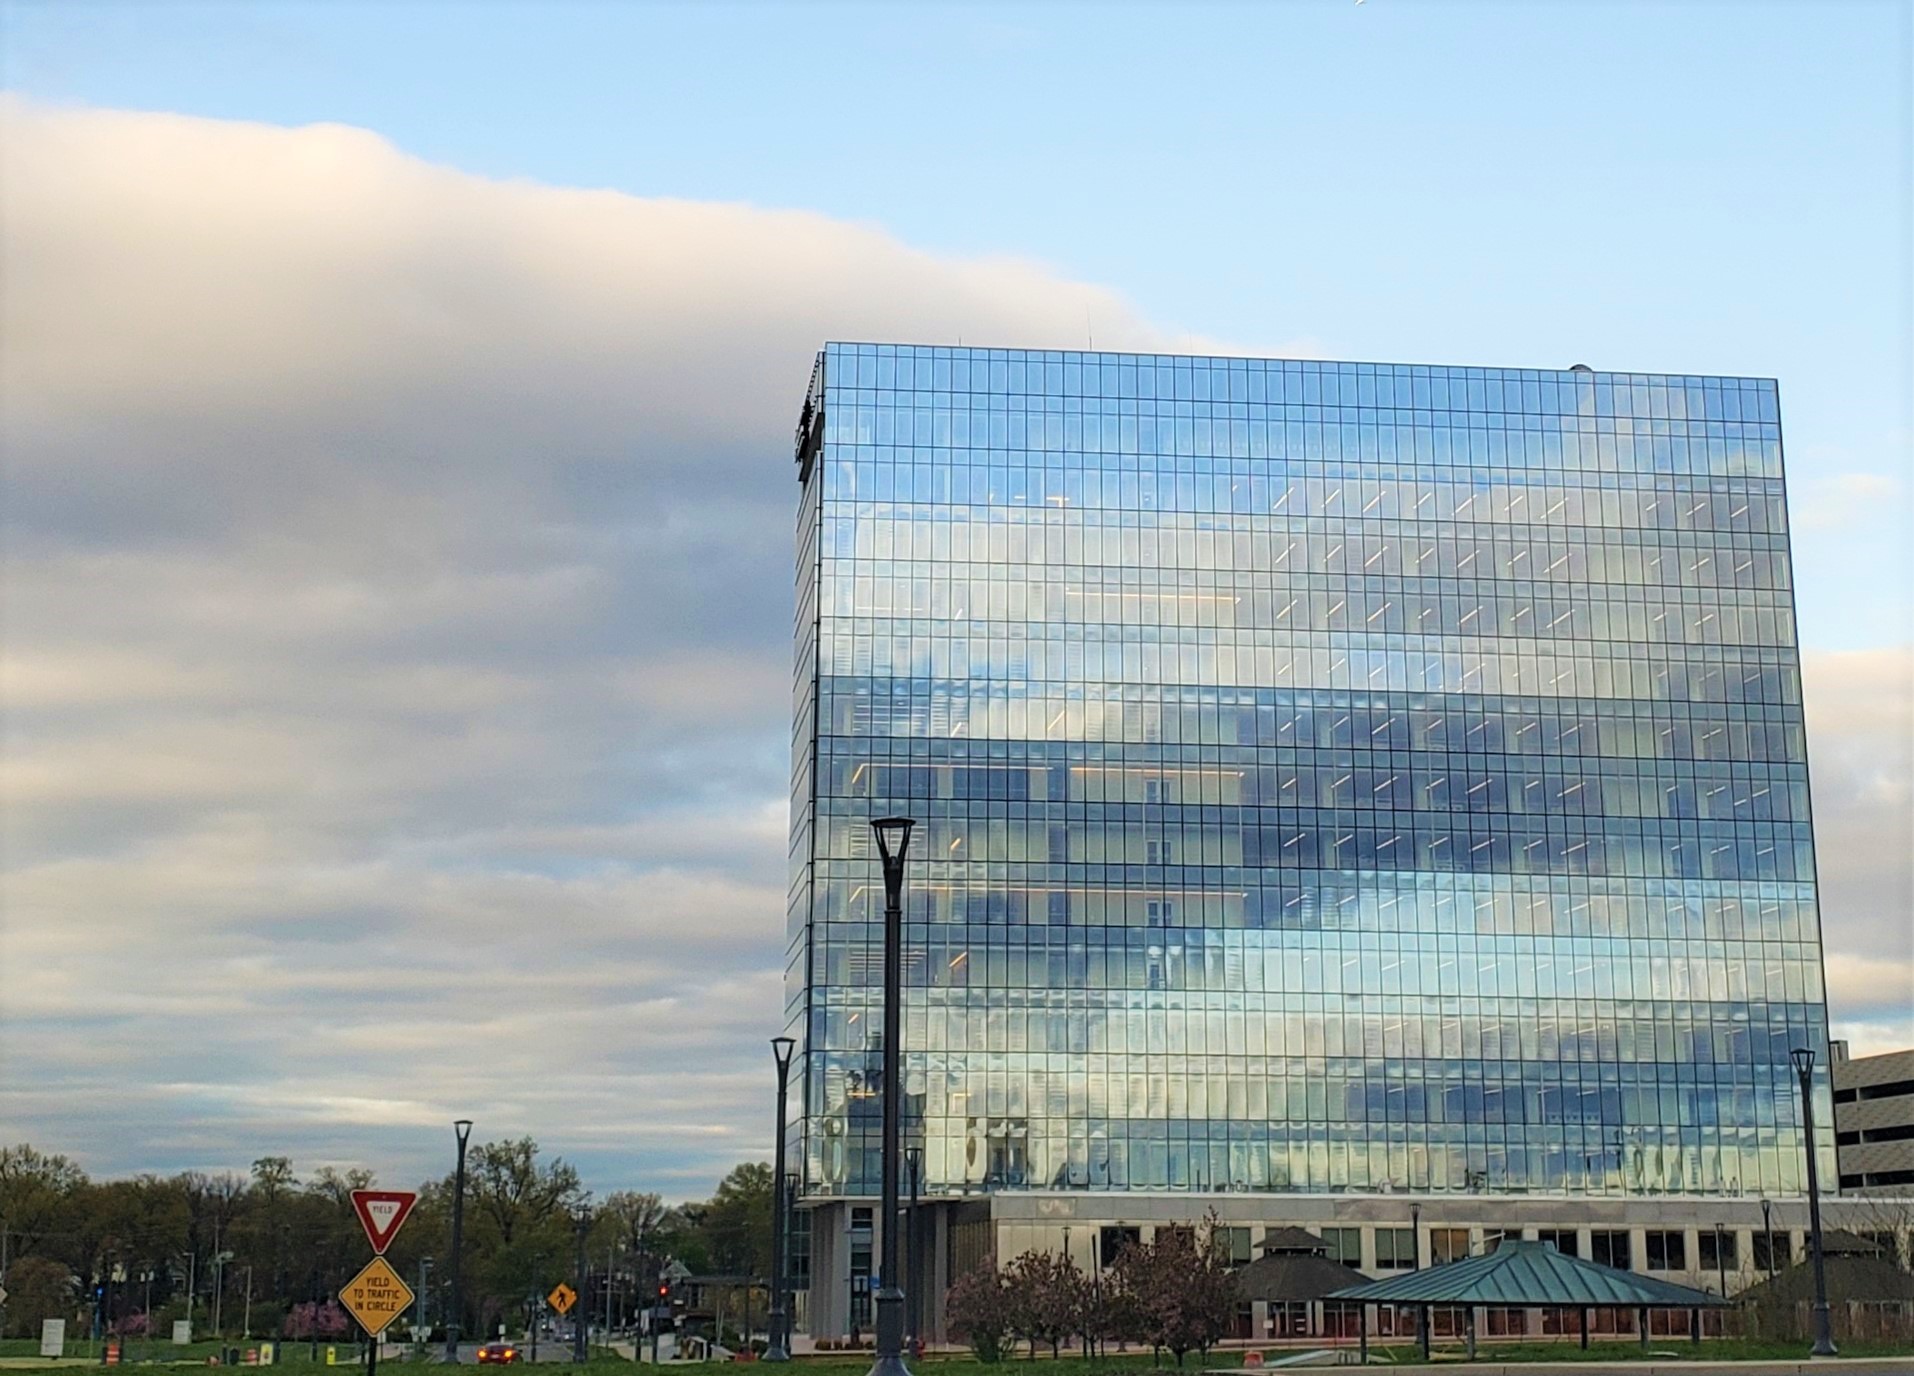 A street-view of a corporate Eisai building with glass exterior and clouds in the skyline